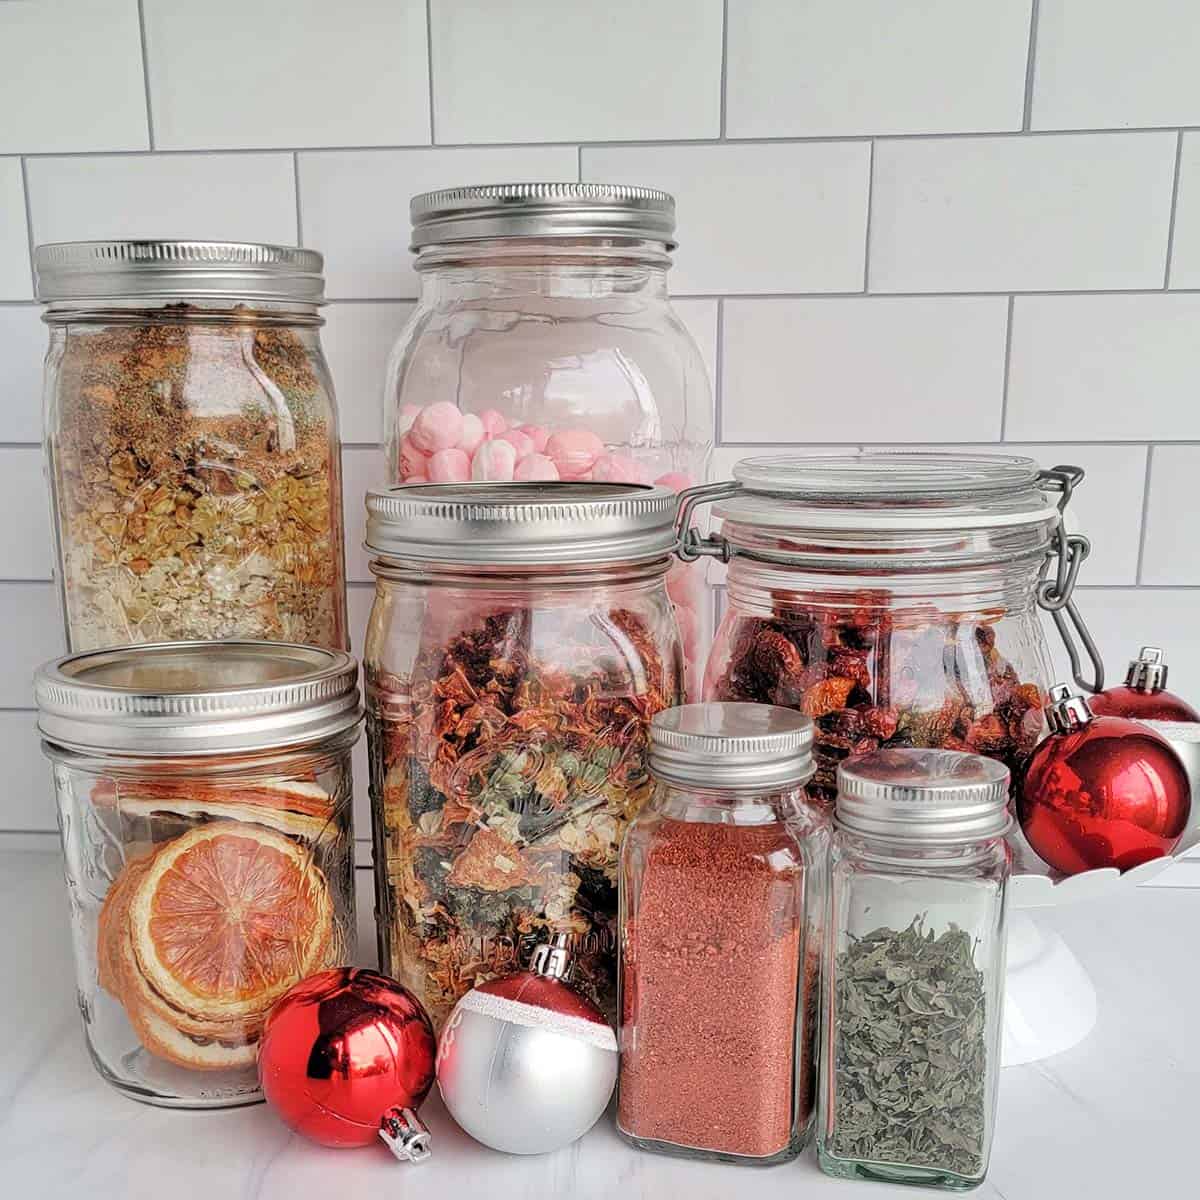 Christmas Gift Ideas from Dehydrated Food - The Purposeful Pantry